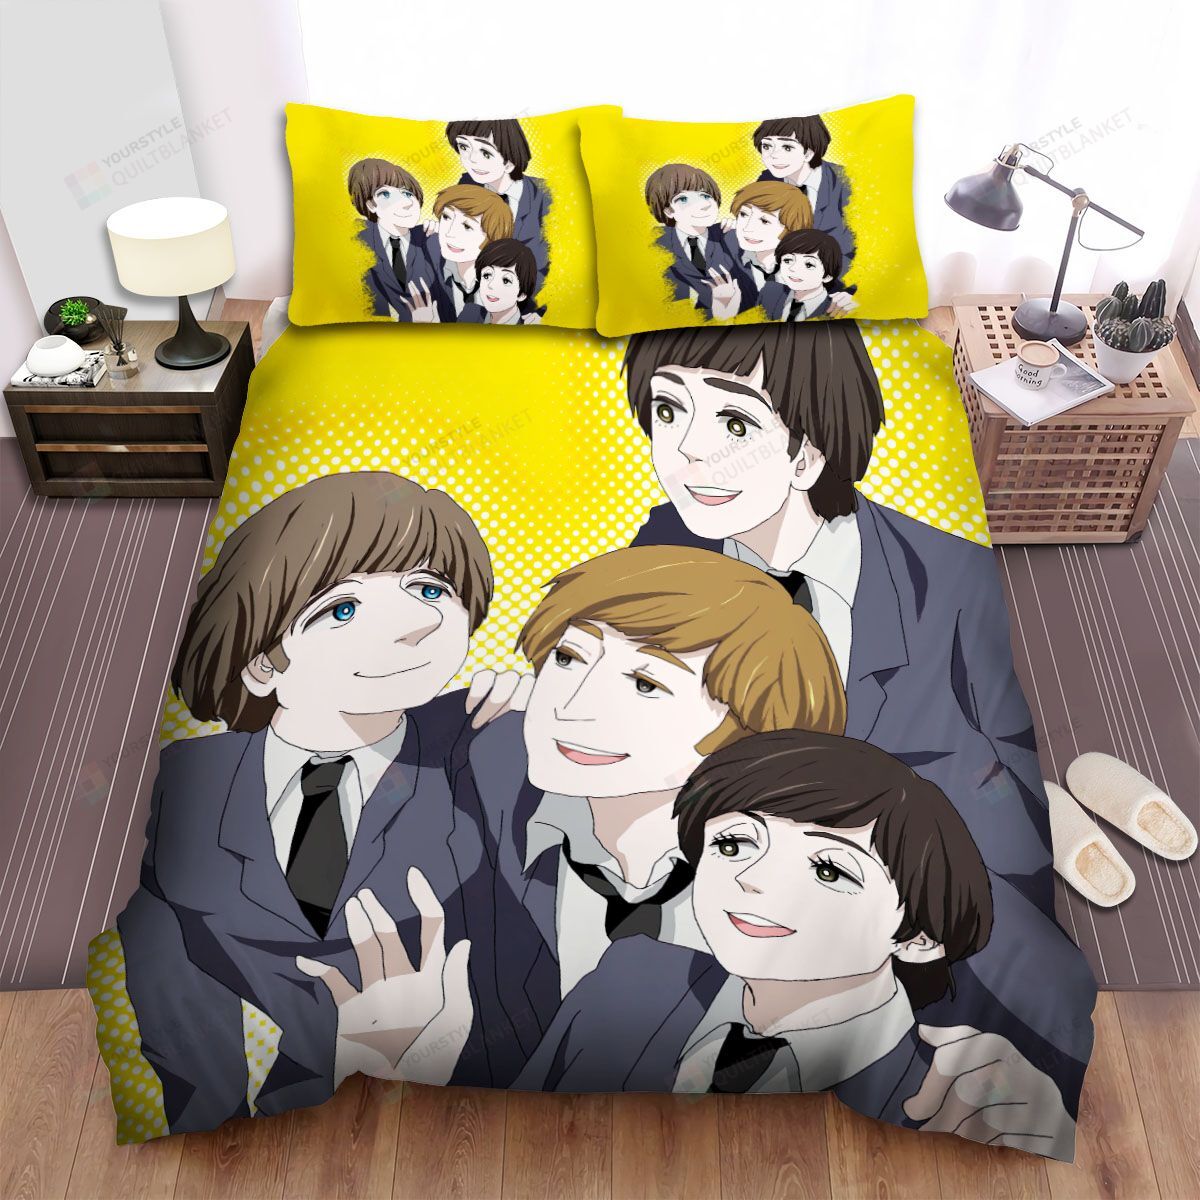 Music, John Lennon, In The Middle Anime Bed Sheets Spread Duvet Cover Bedding Sets